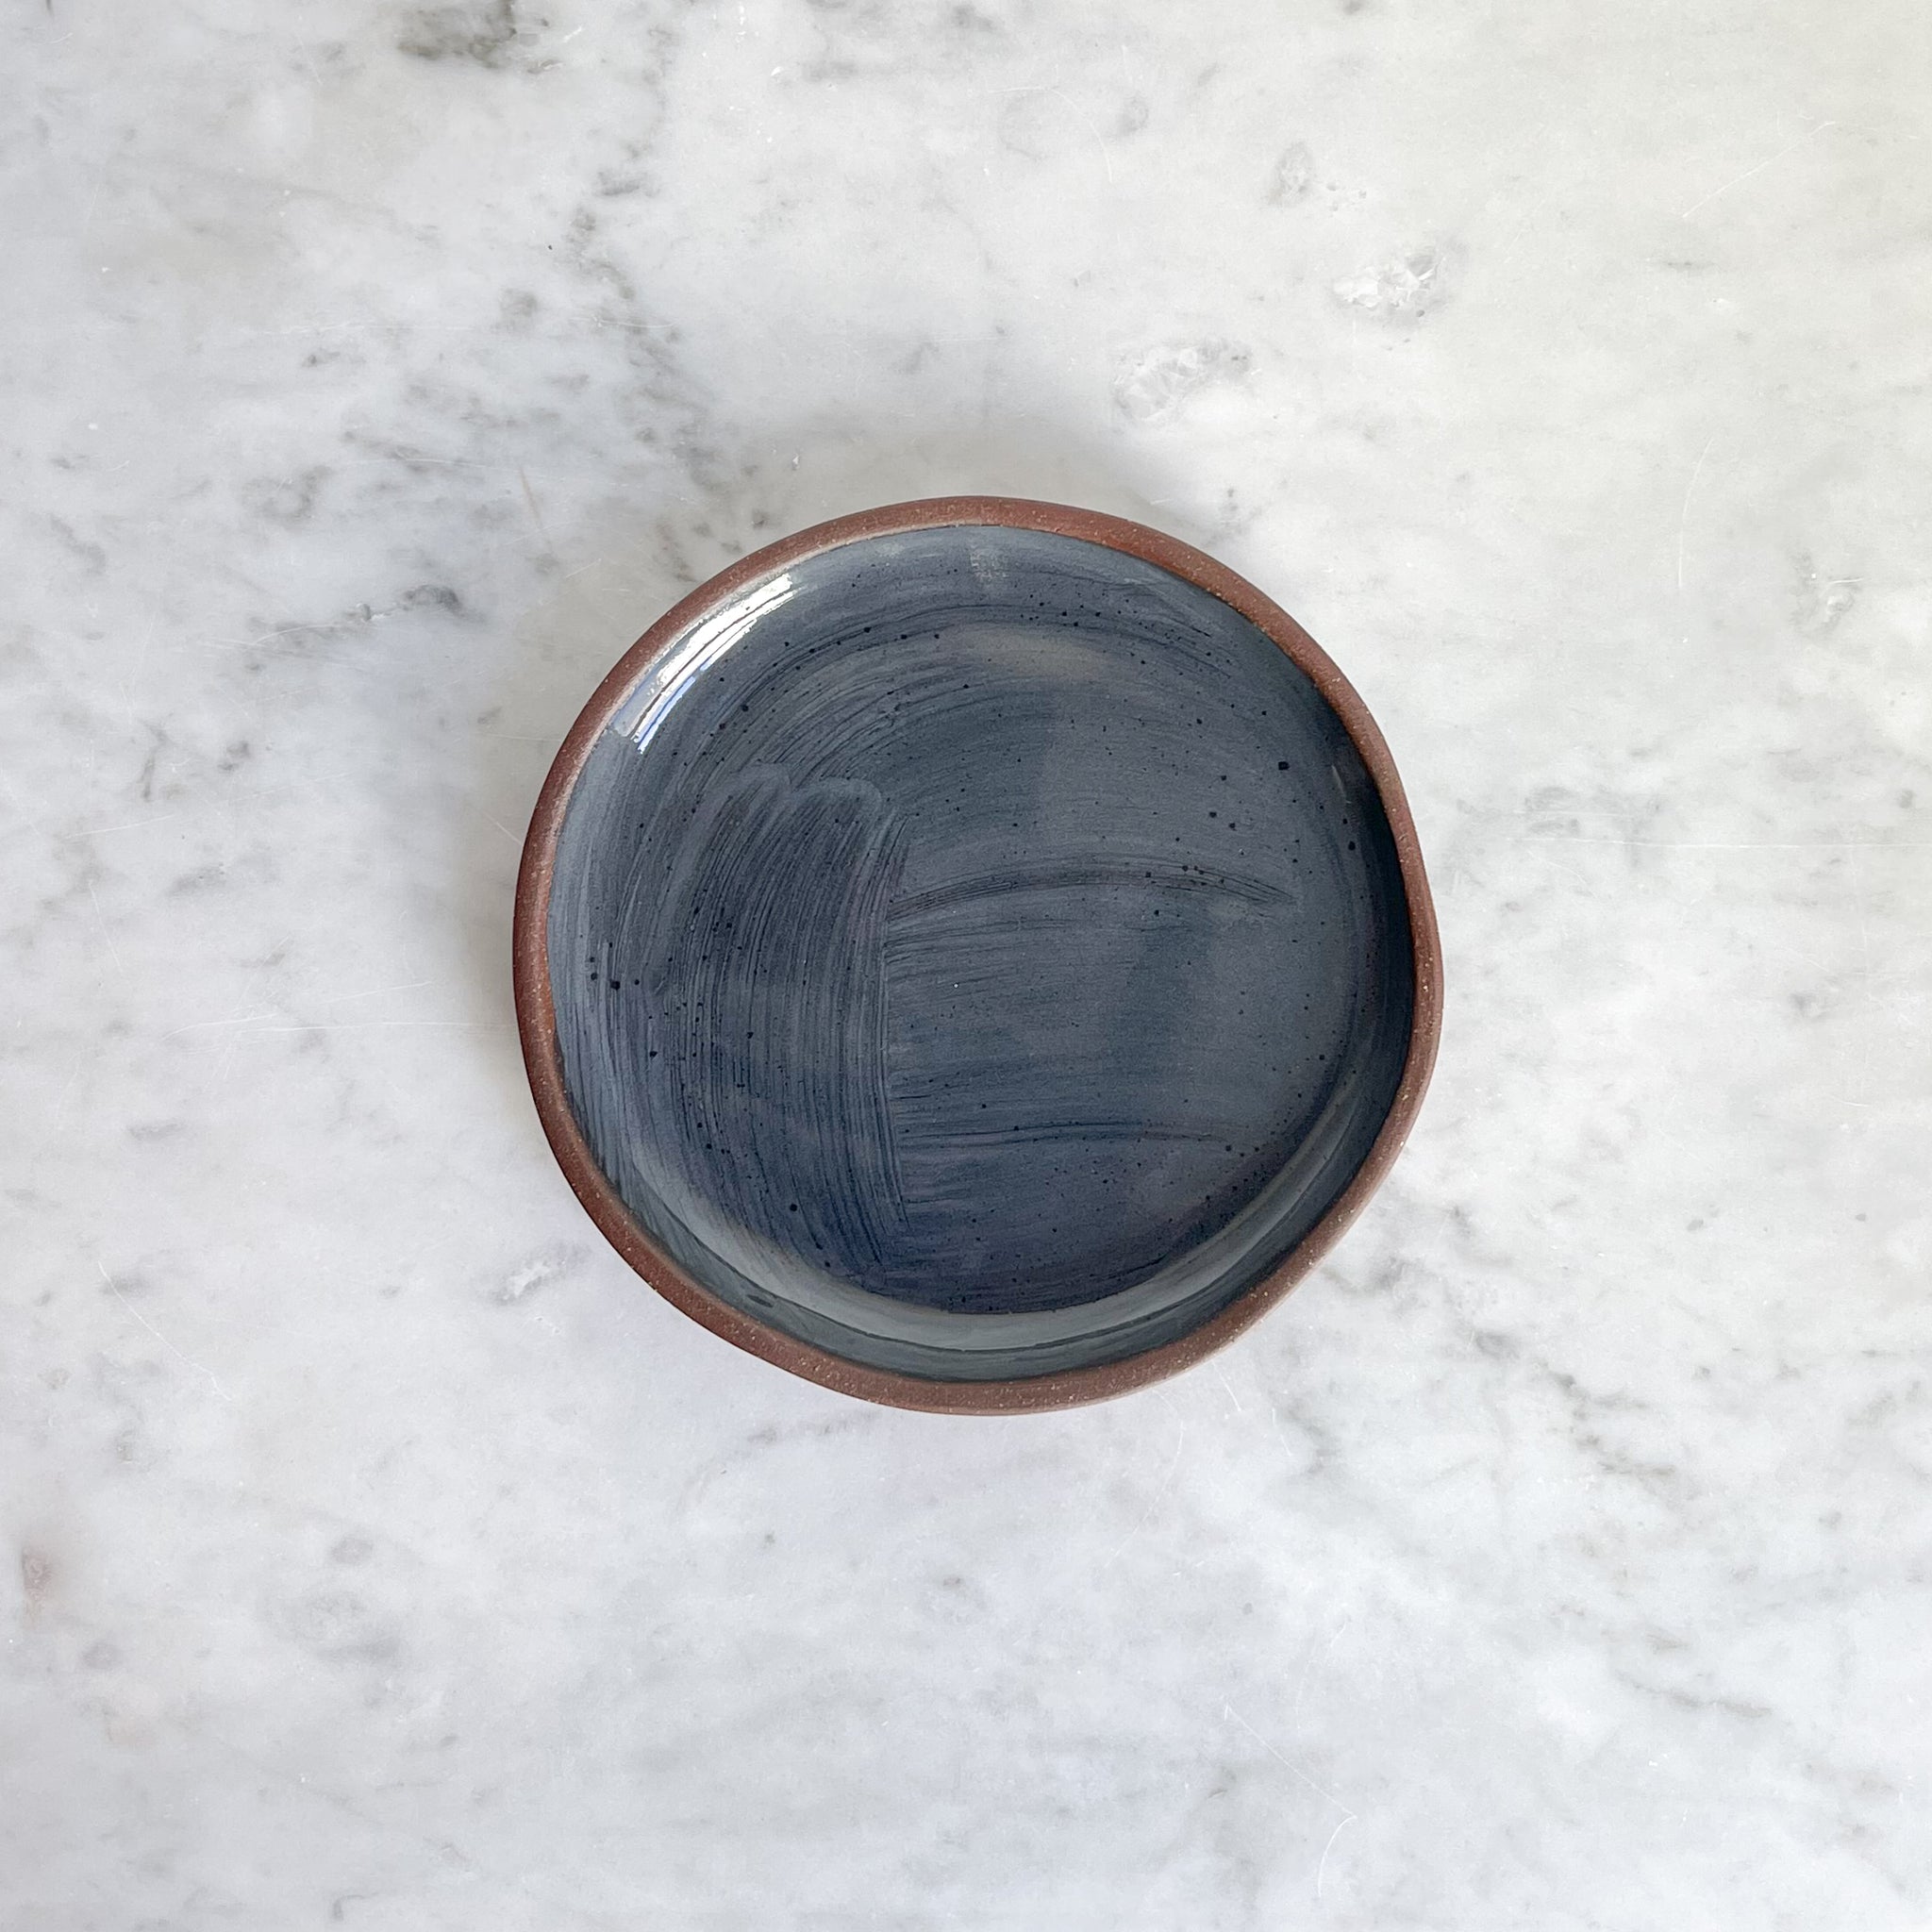 A single small ceramic plate with gray glaze on a marble counter.